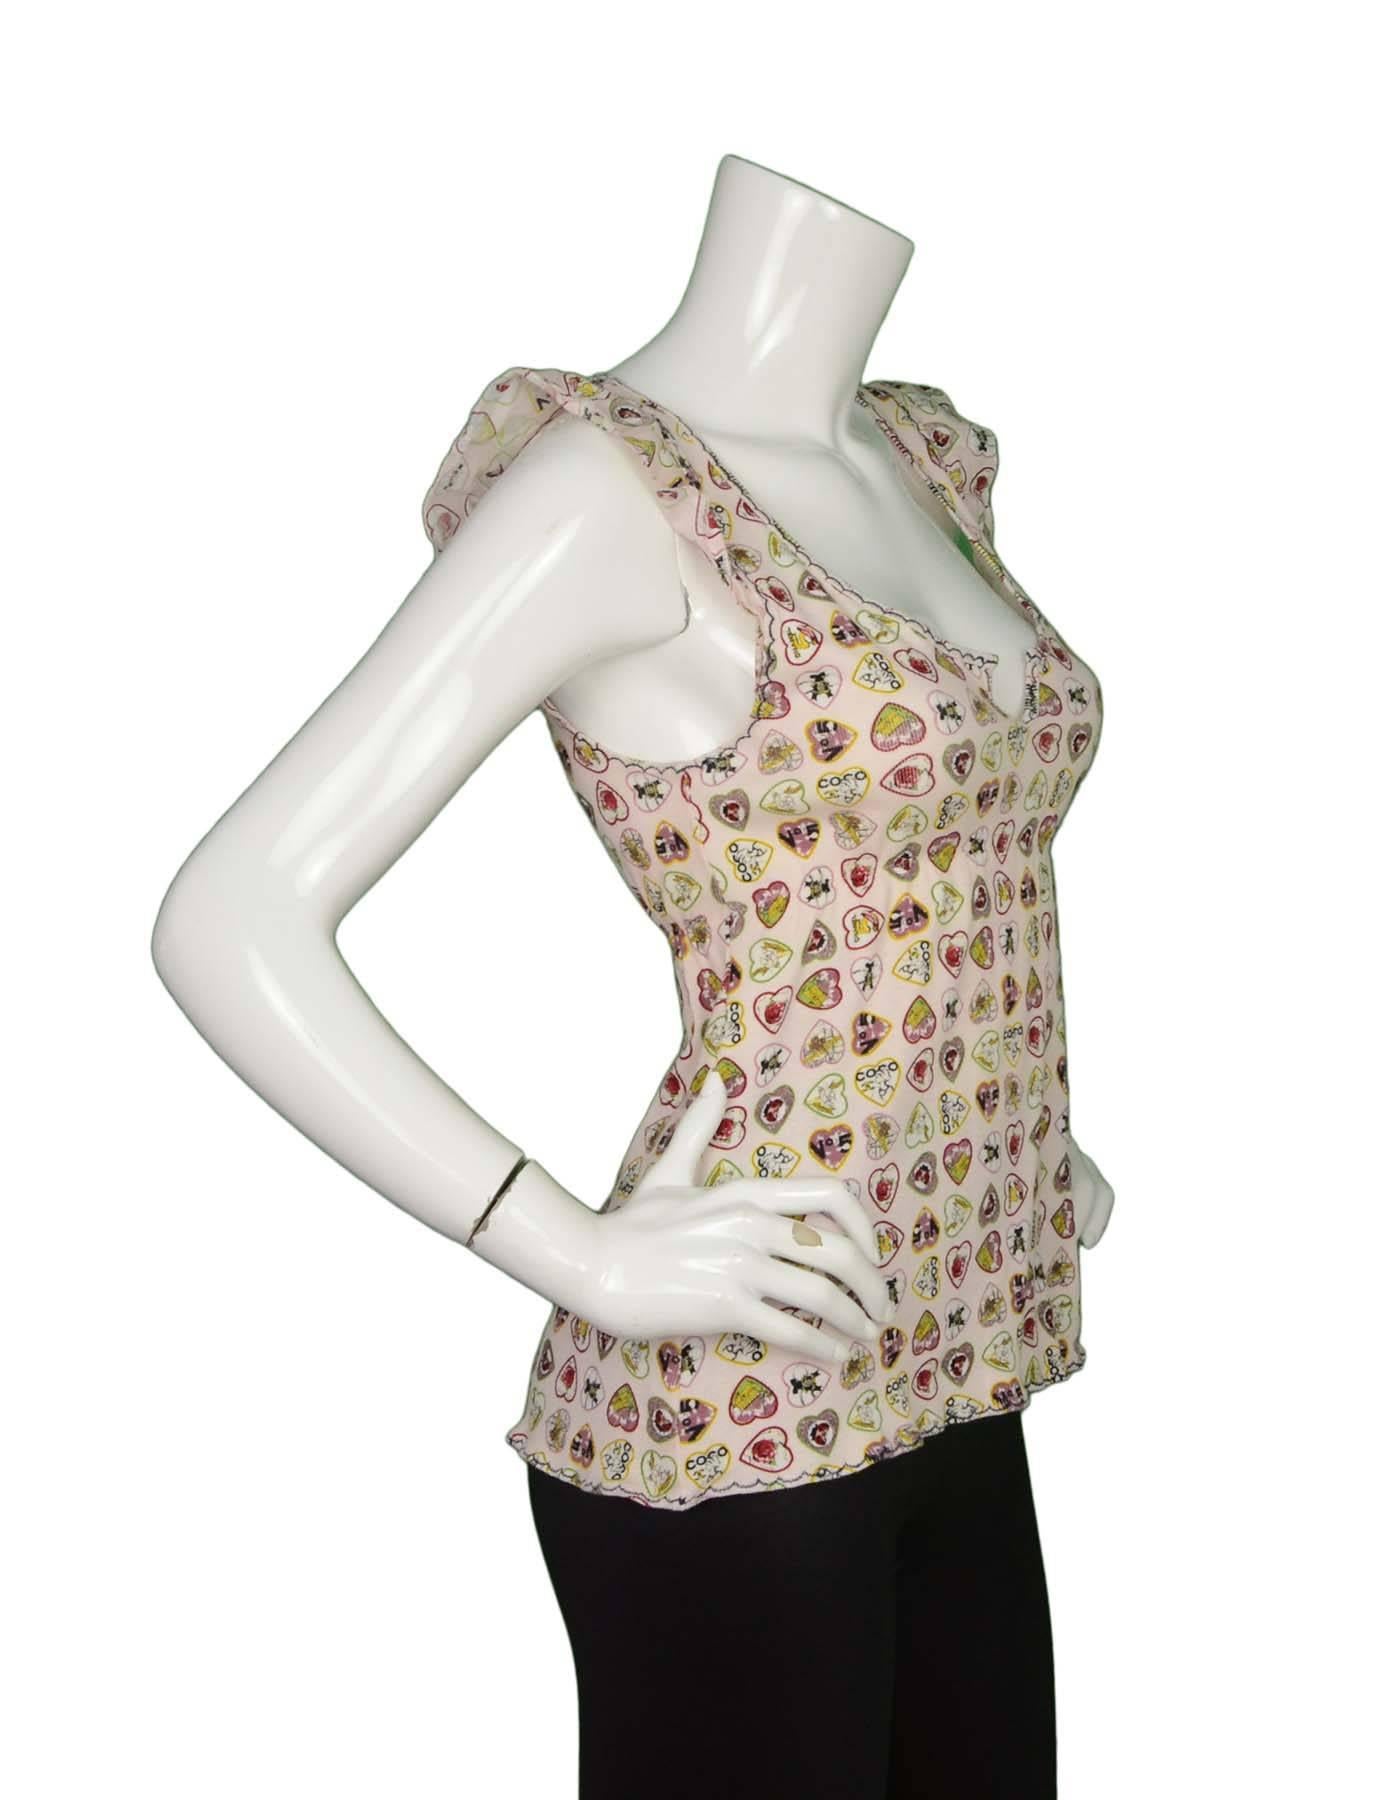 Chanel Coco Heart Print Ribbed Cotton Top 
Features elastic at waist for empire-waist look
Made In: Italy
Color: Light pink, red, yellow, black and white
Composition: 95% cotton, 5% spandex
Lining: None
Closure/Opening: Pull over
Exterior